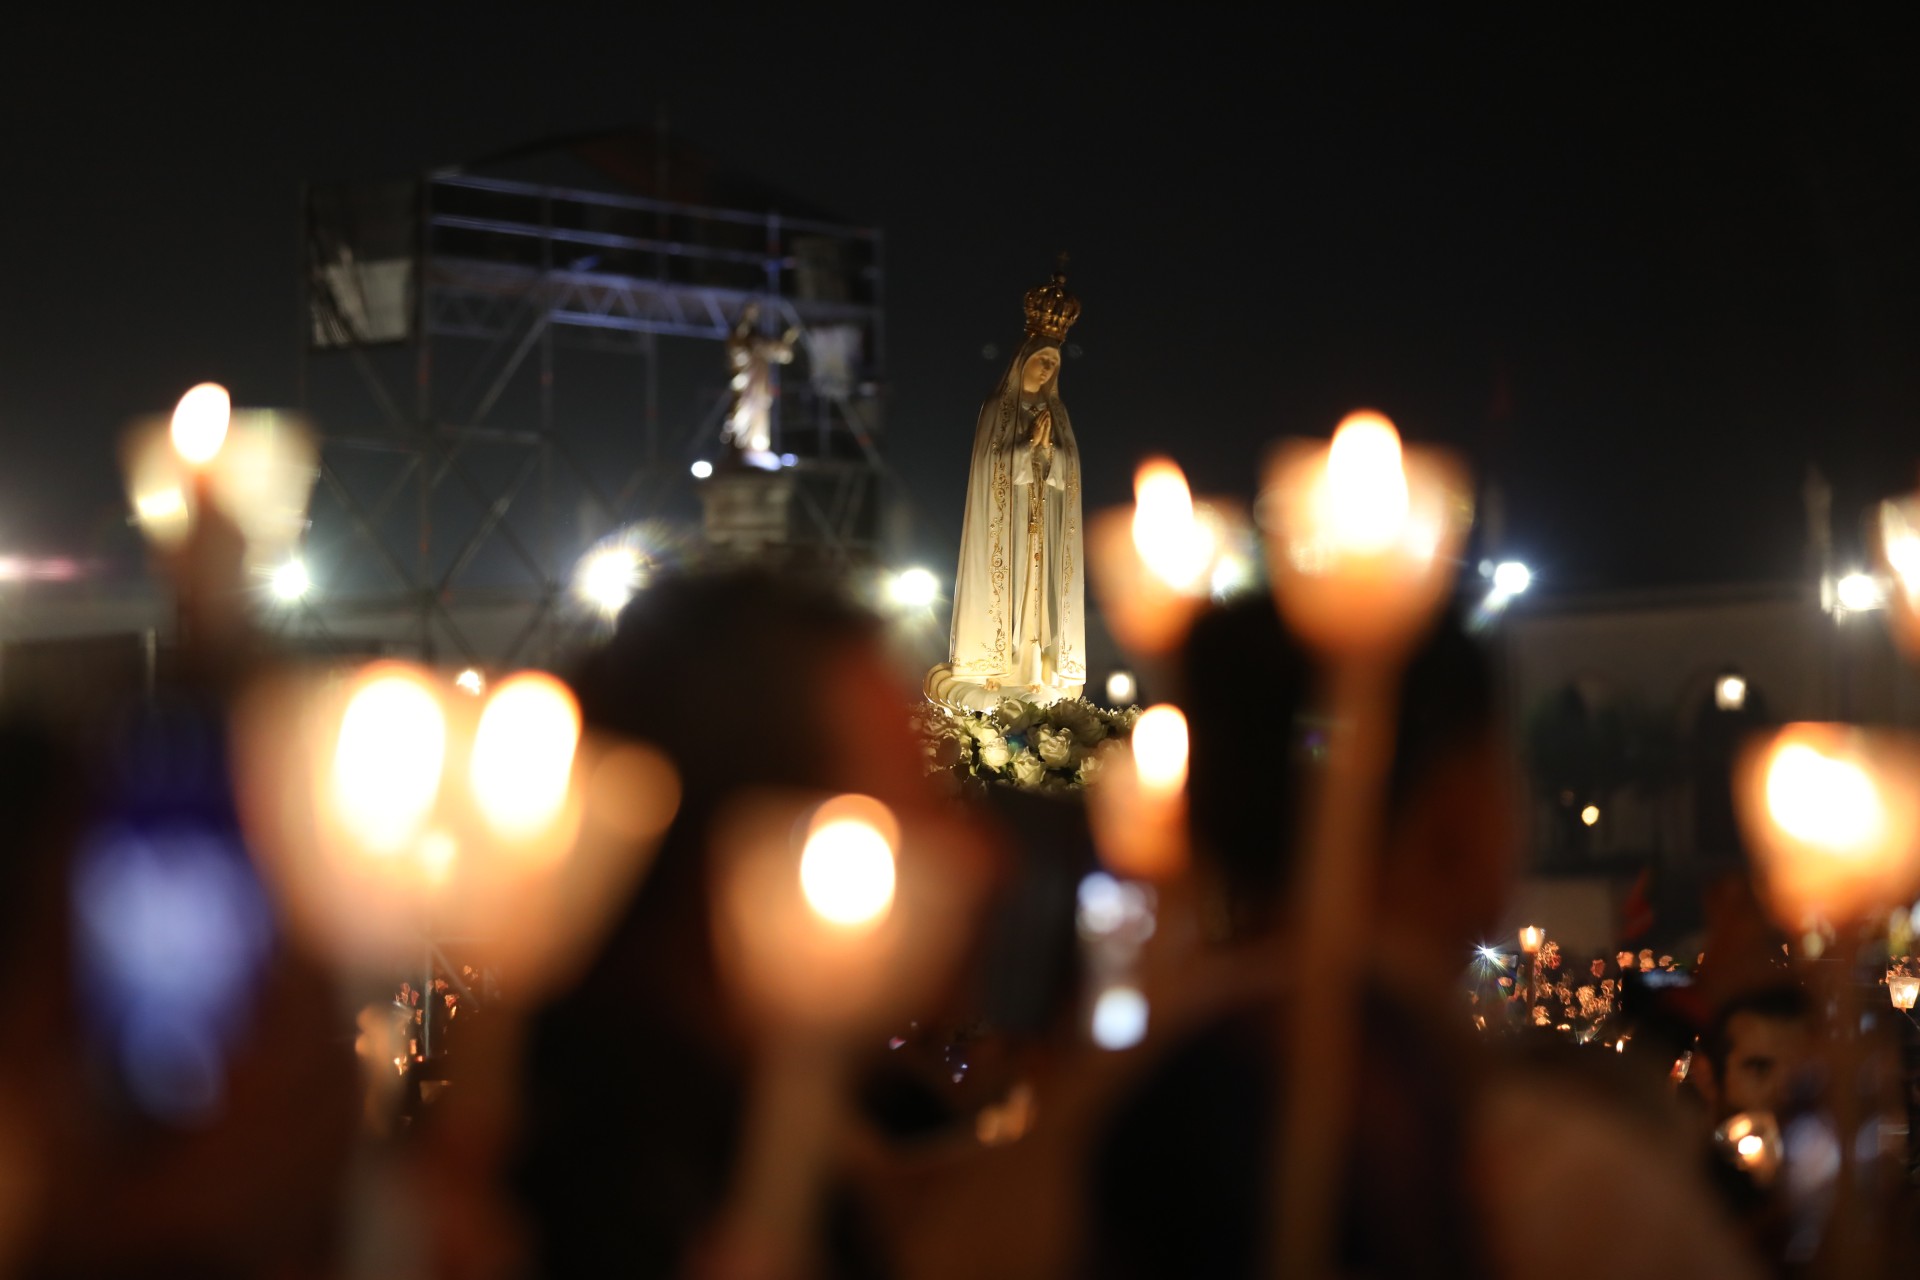 Sculptures of Our Lady of Fatima